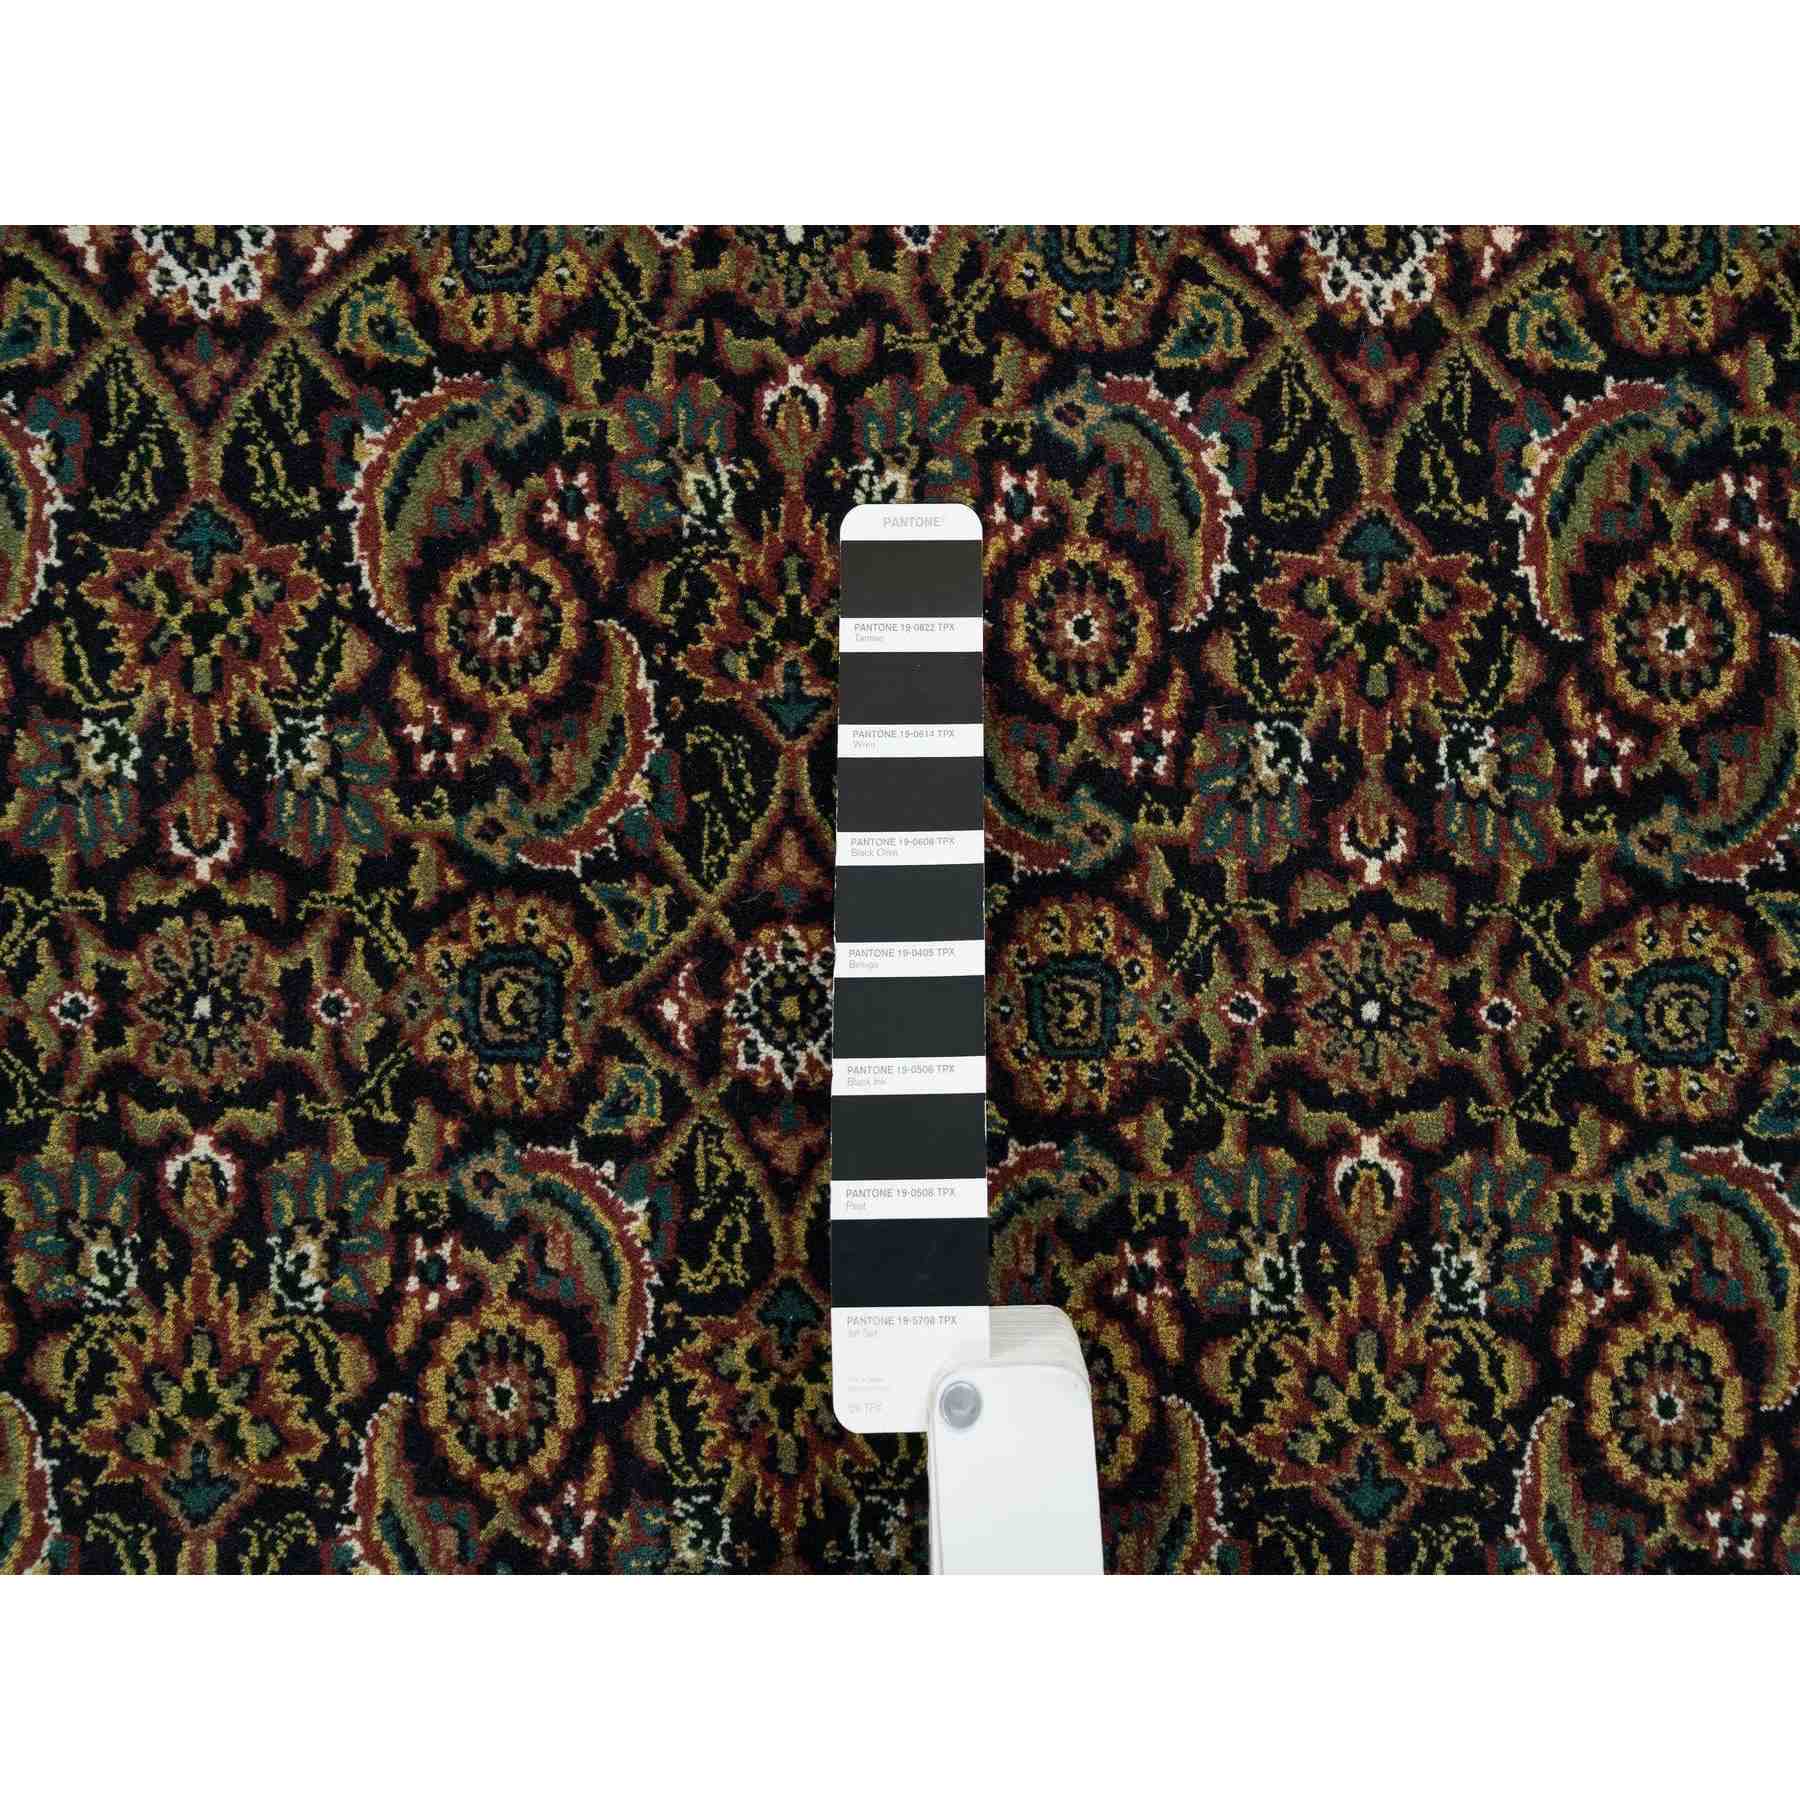 Fine-Oriental-Hand-Knotted-Rug-328955